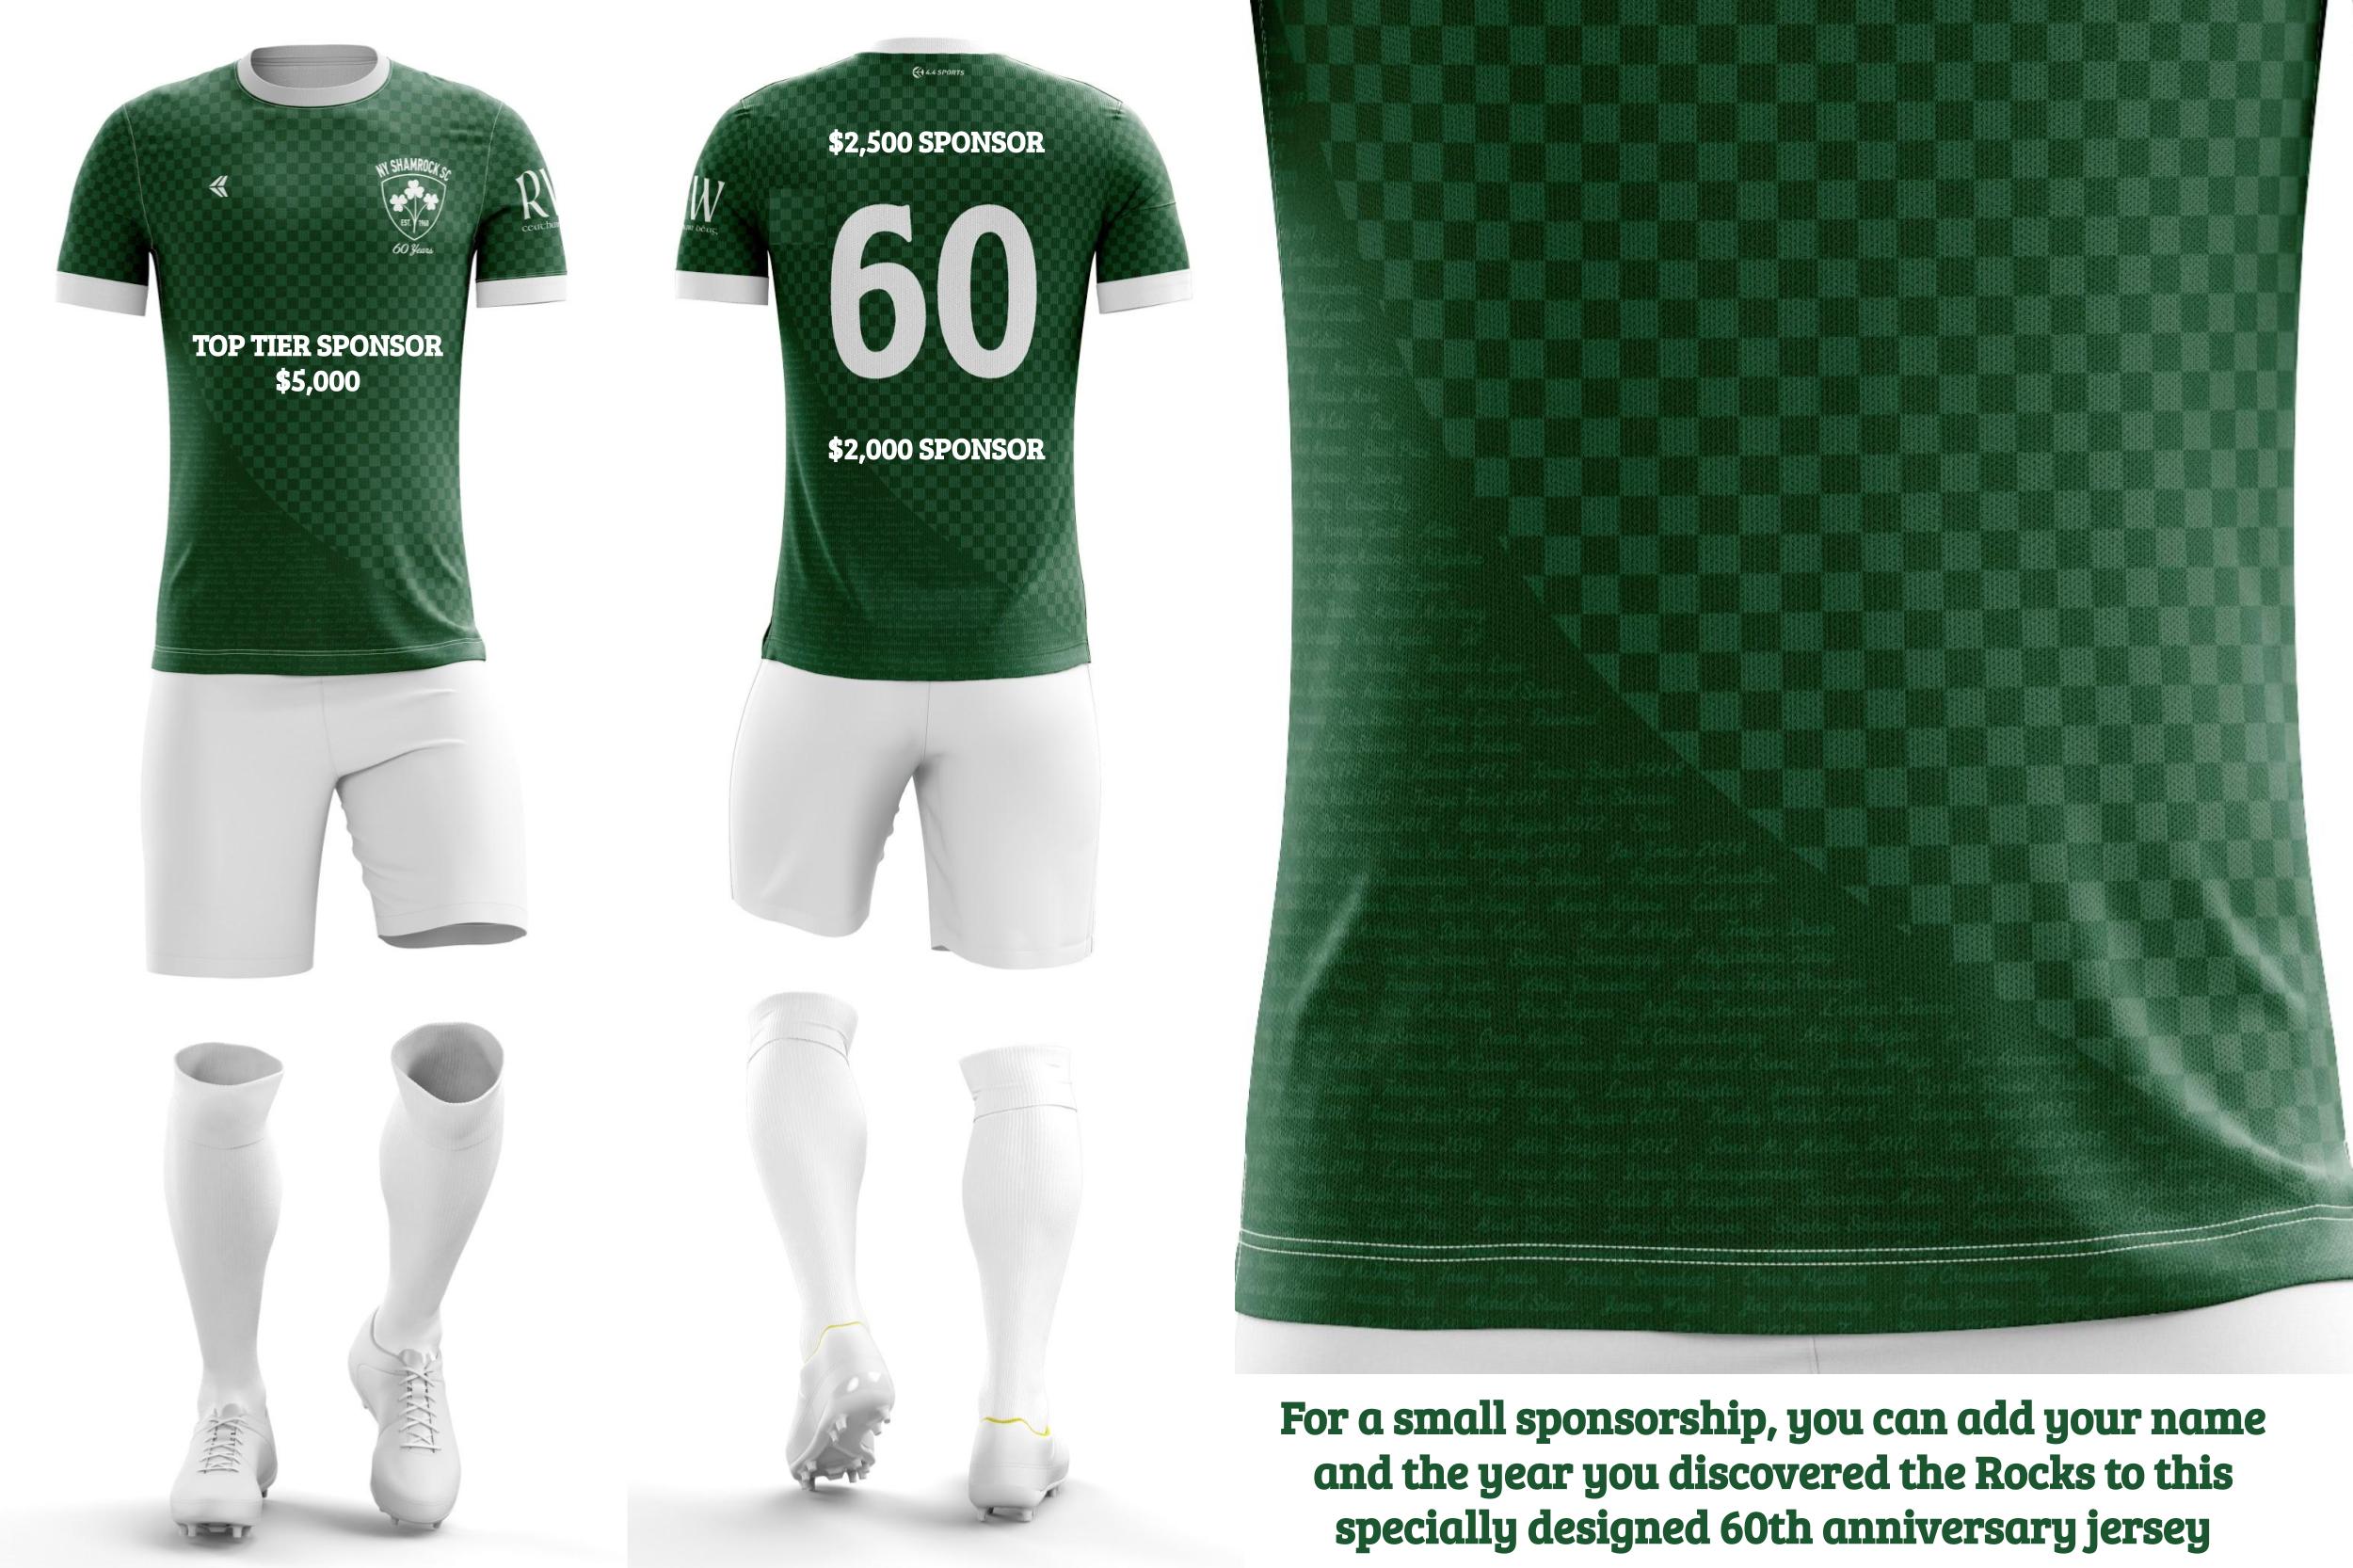 Do you want to be a part of our 60th anniversary Rocks jersey!